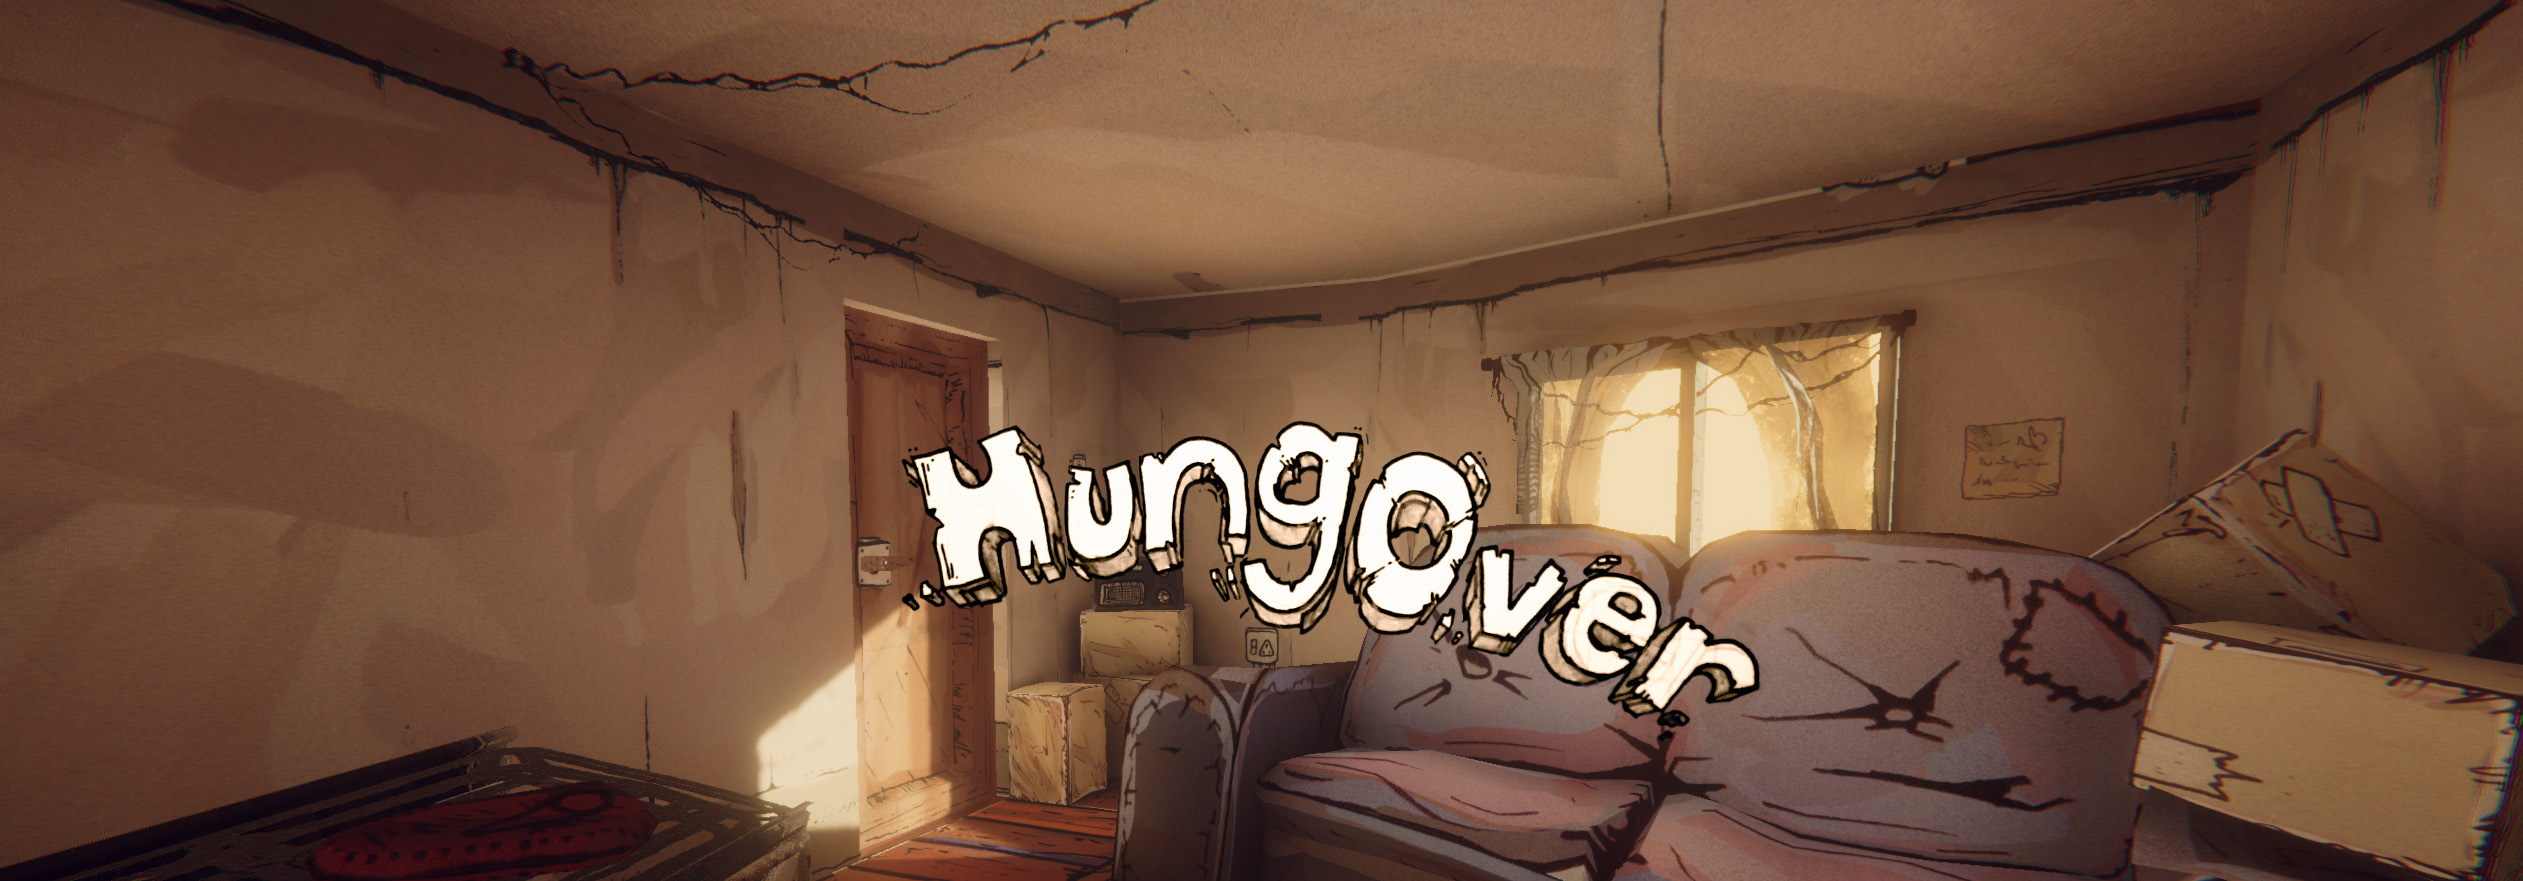 Hungover